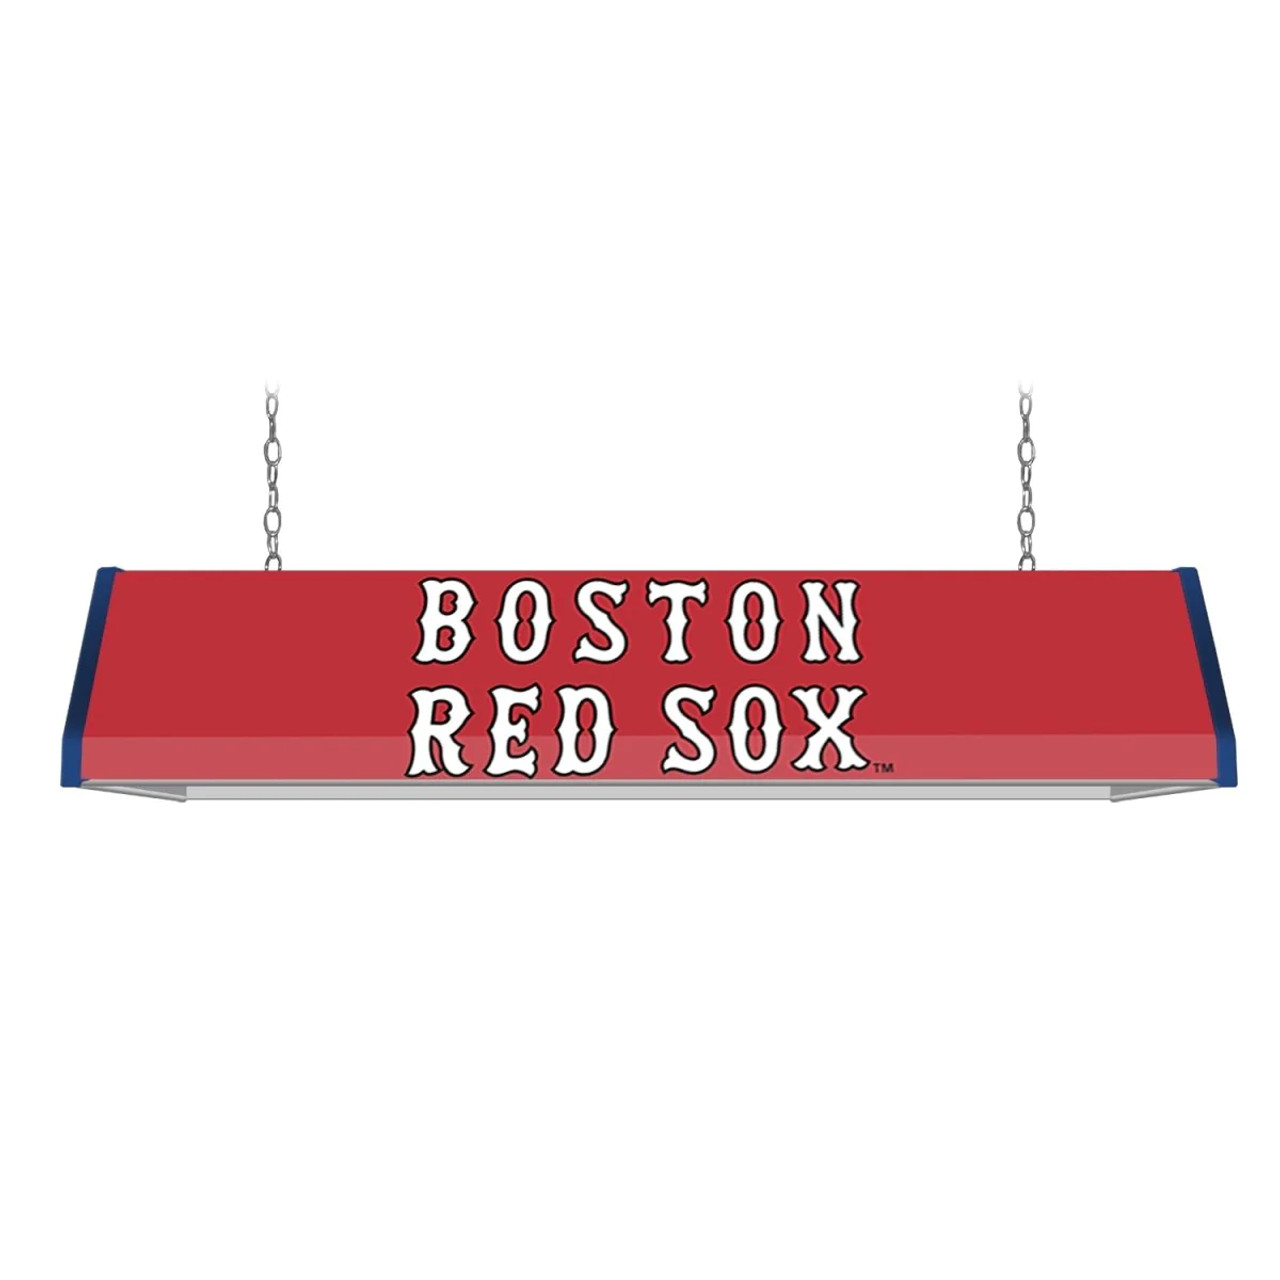 Boston Red Sox: Standard Pool Table Light "A" Version